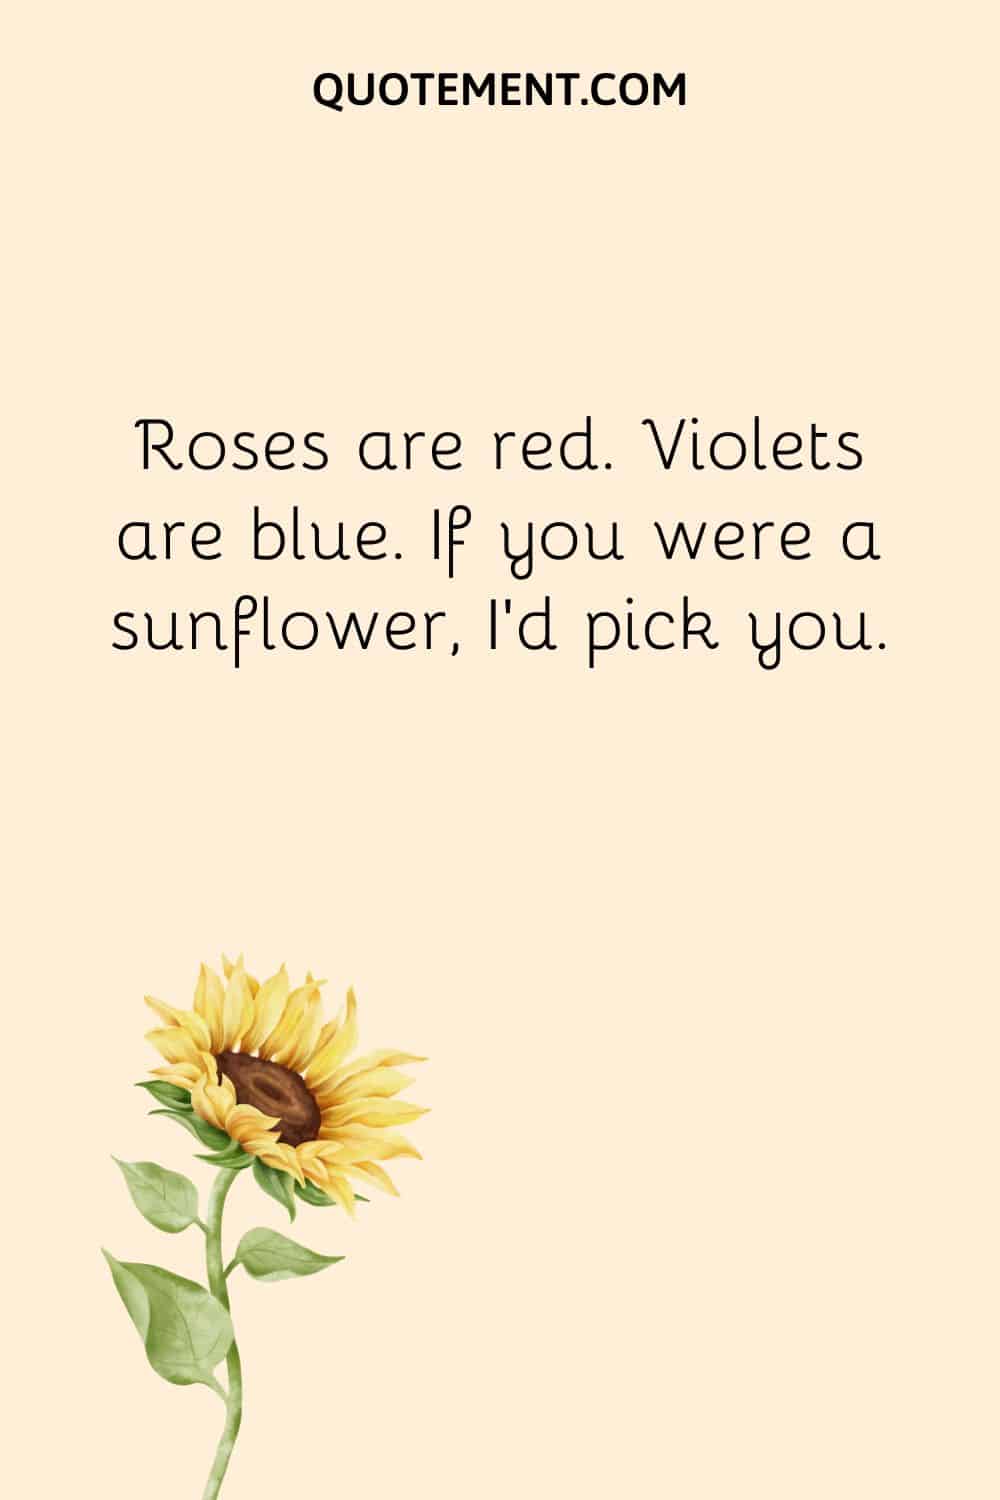 Roses are red. Violets are blue. If you were a sunflower, I’d pick you.